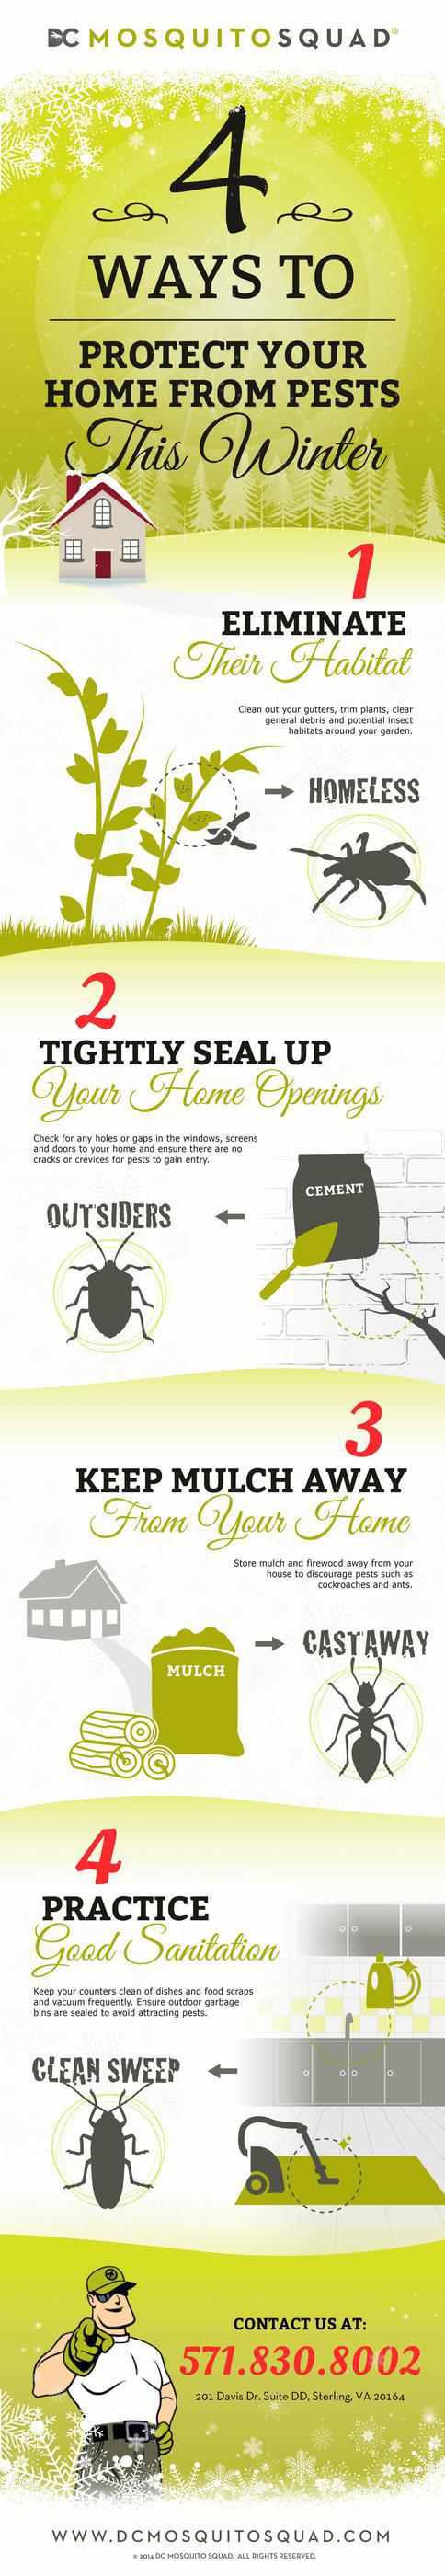 Protect your home from winter pests